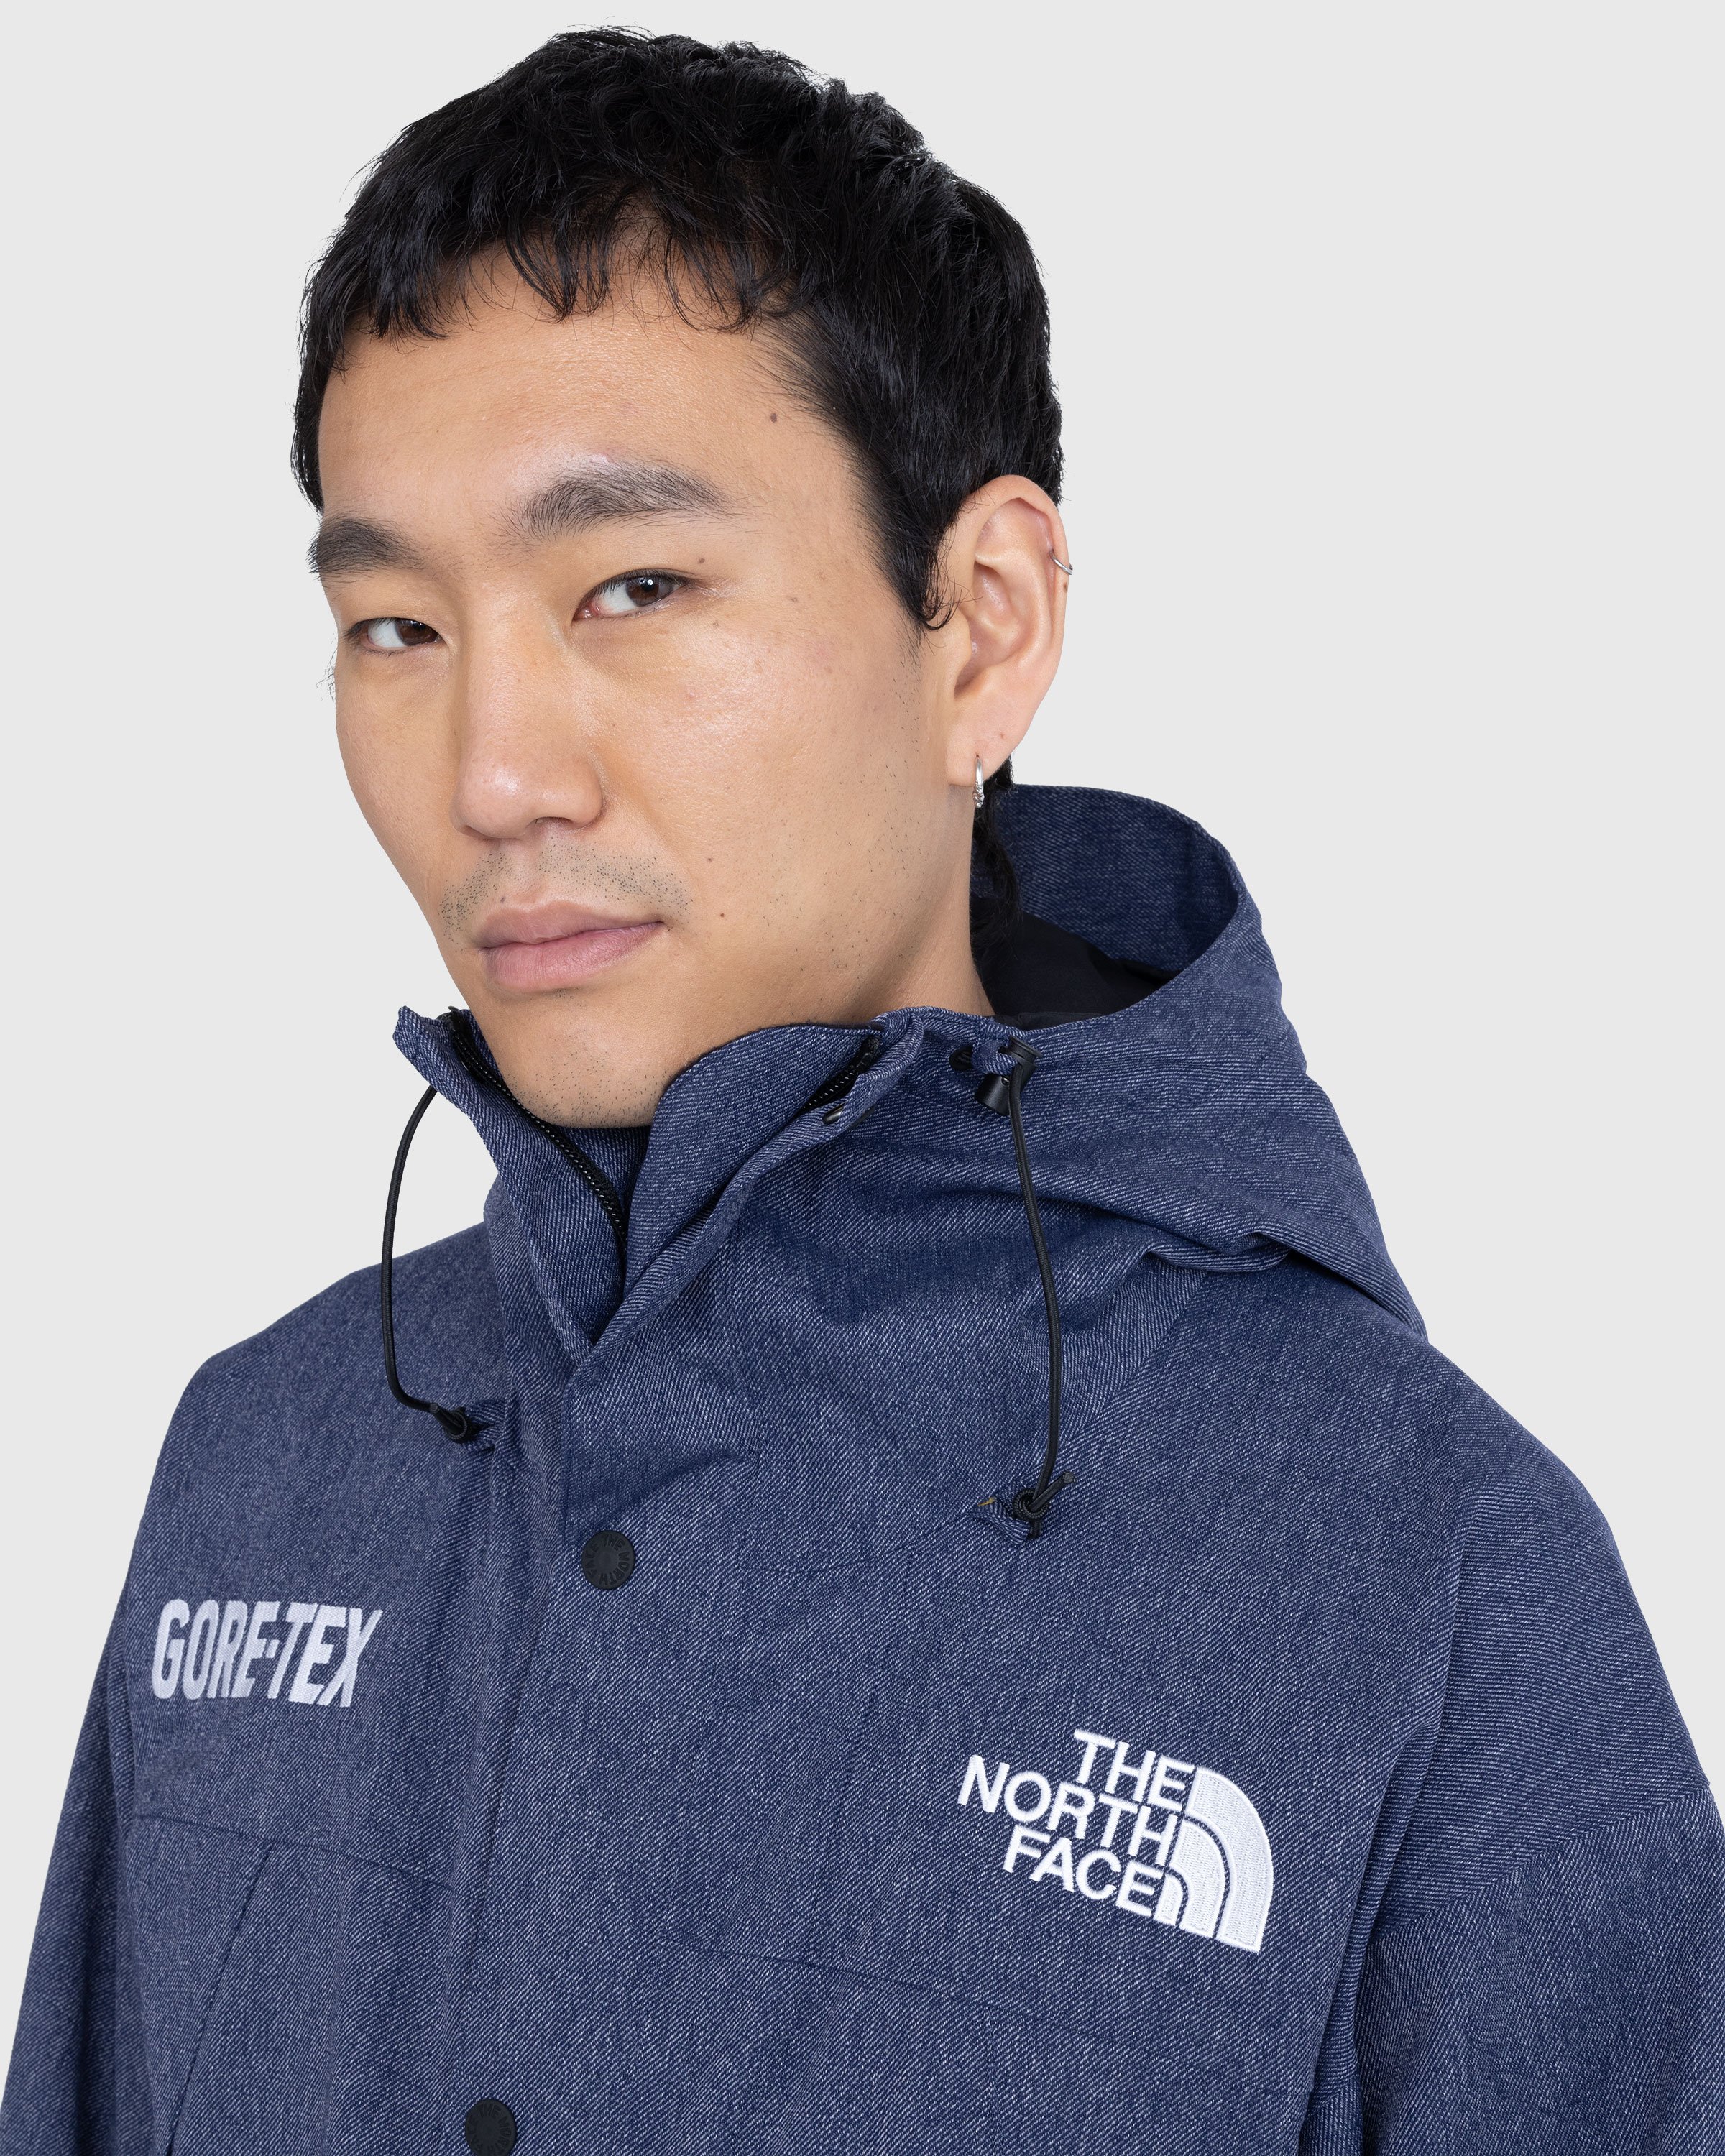 The North Face - GORE-TEX Mountain Jacket Denim Blue/TNF Black - Clothing - Blue - Image 6